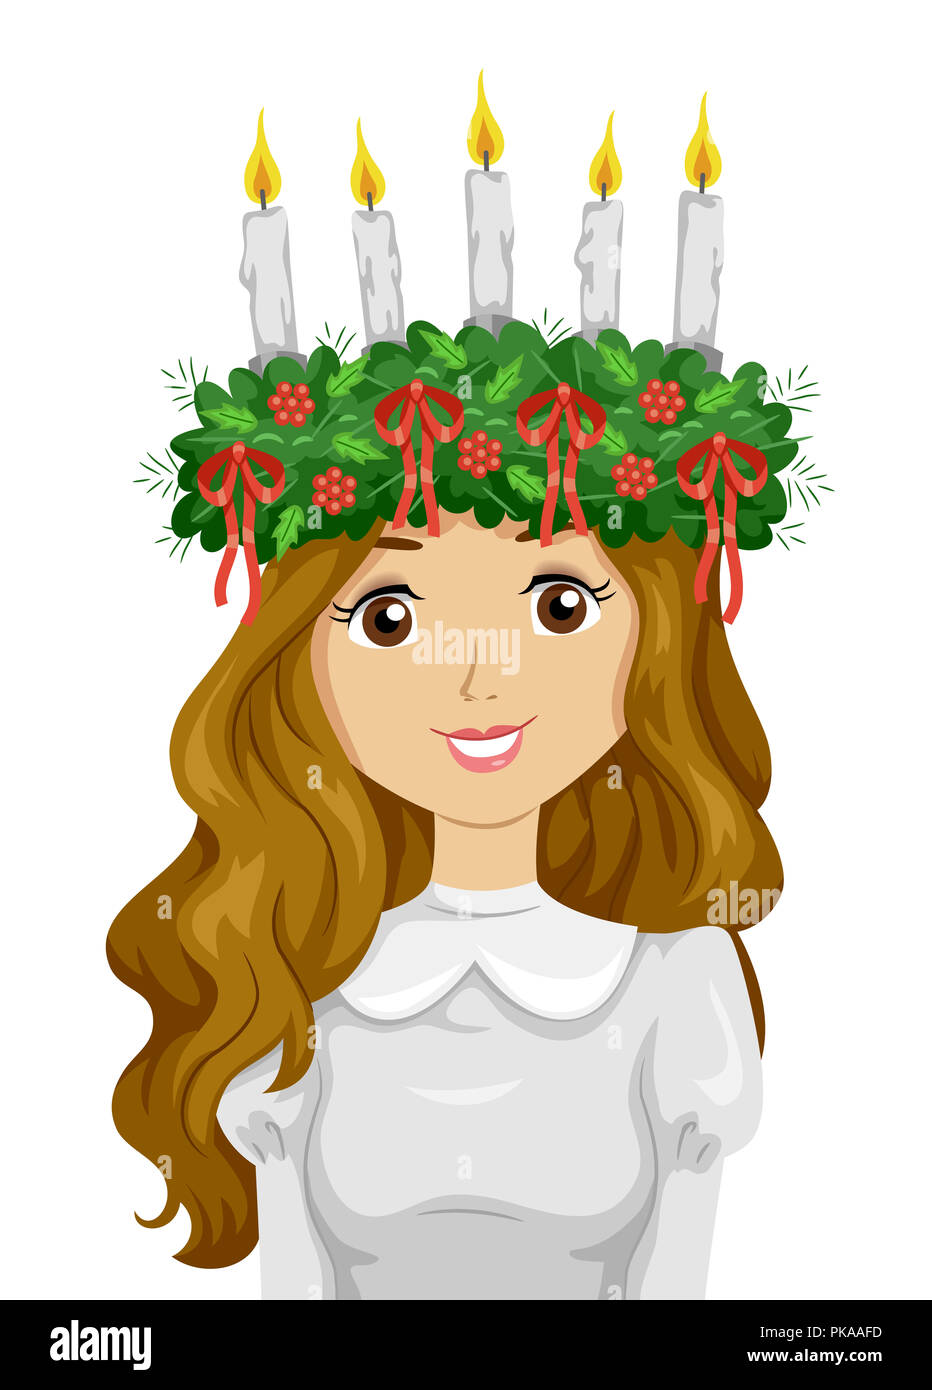 Illustration of a Teen Girl Wearing Saint Lucia Crown with Candles and Ribbons Stock Photo